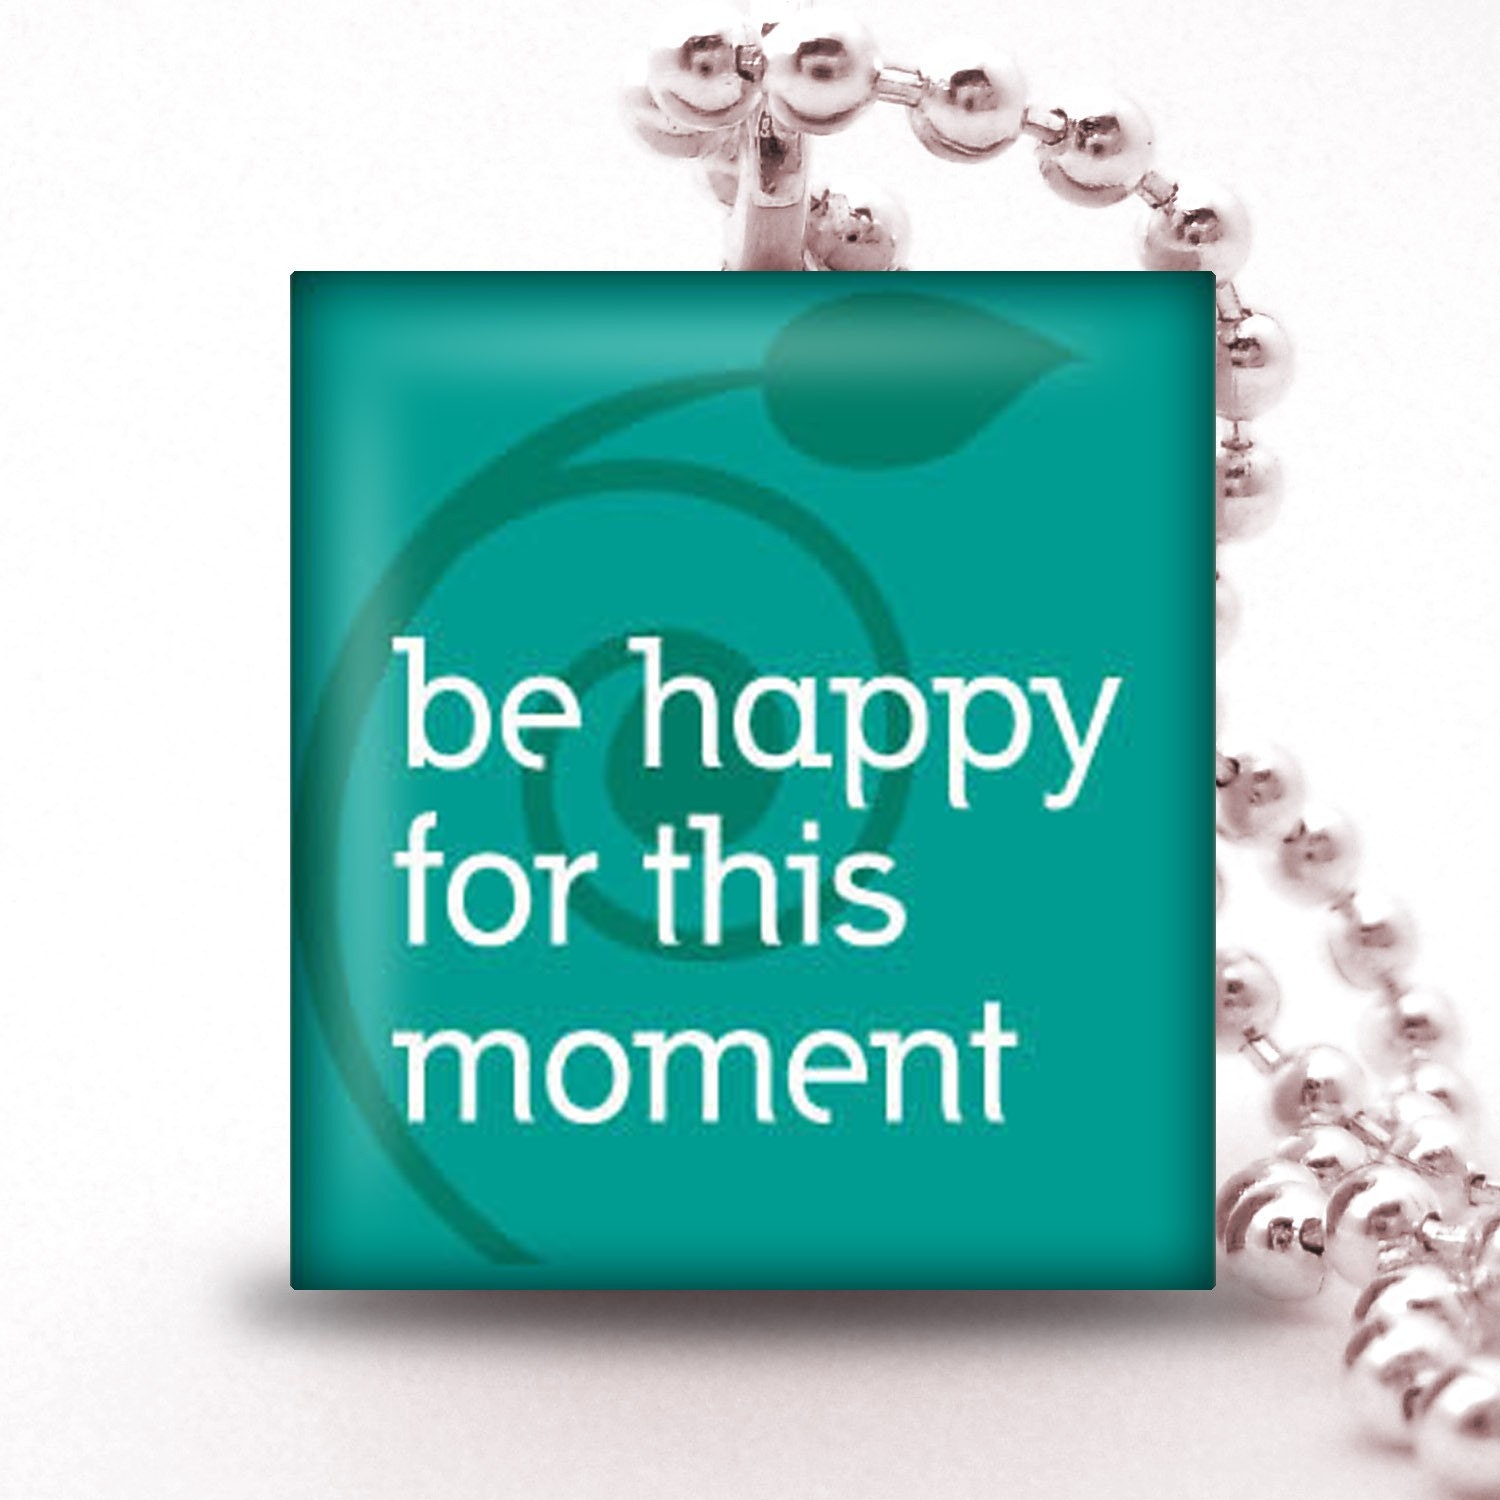 Scrabble Tile Pendant - BE HAPPY FOR THIS MOMENT - Buy 2 Pendants Get 1 Free